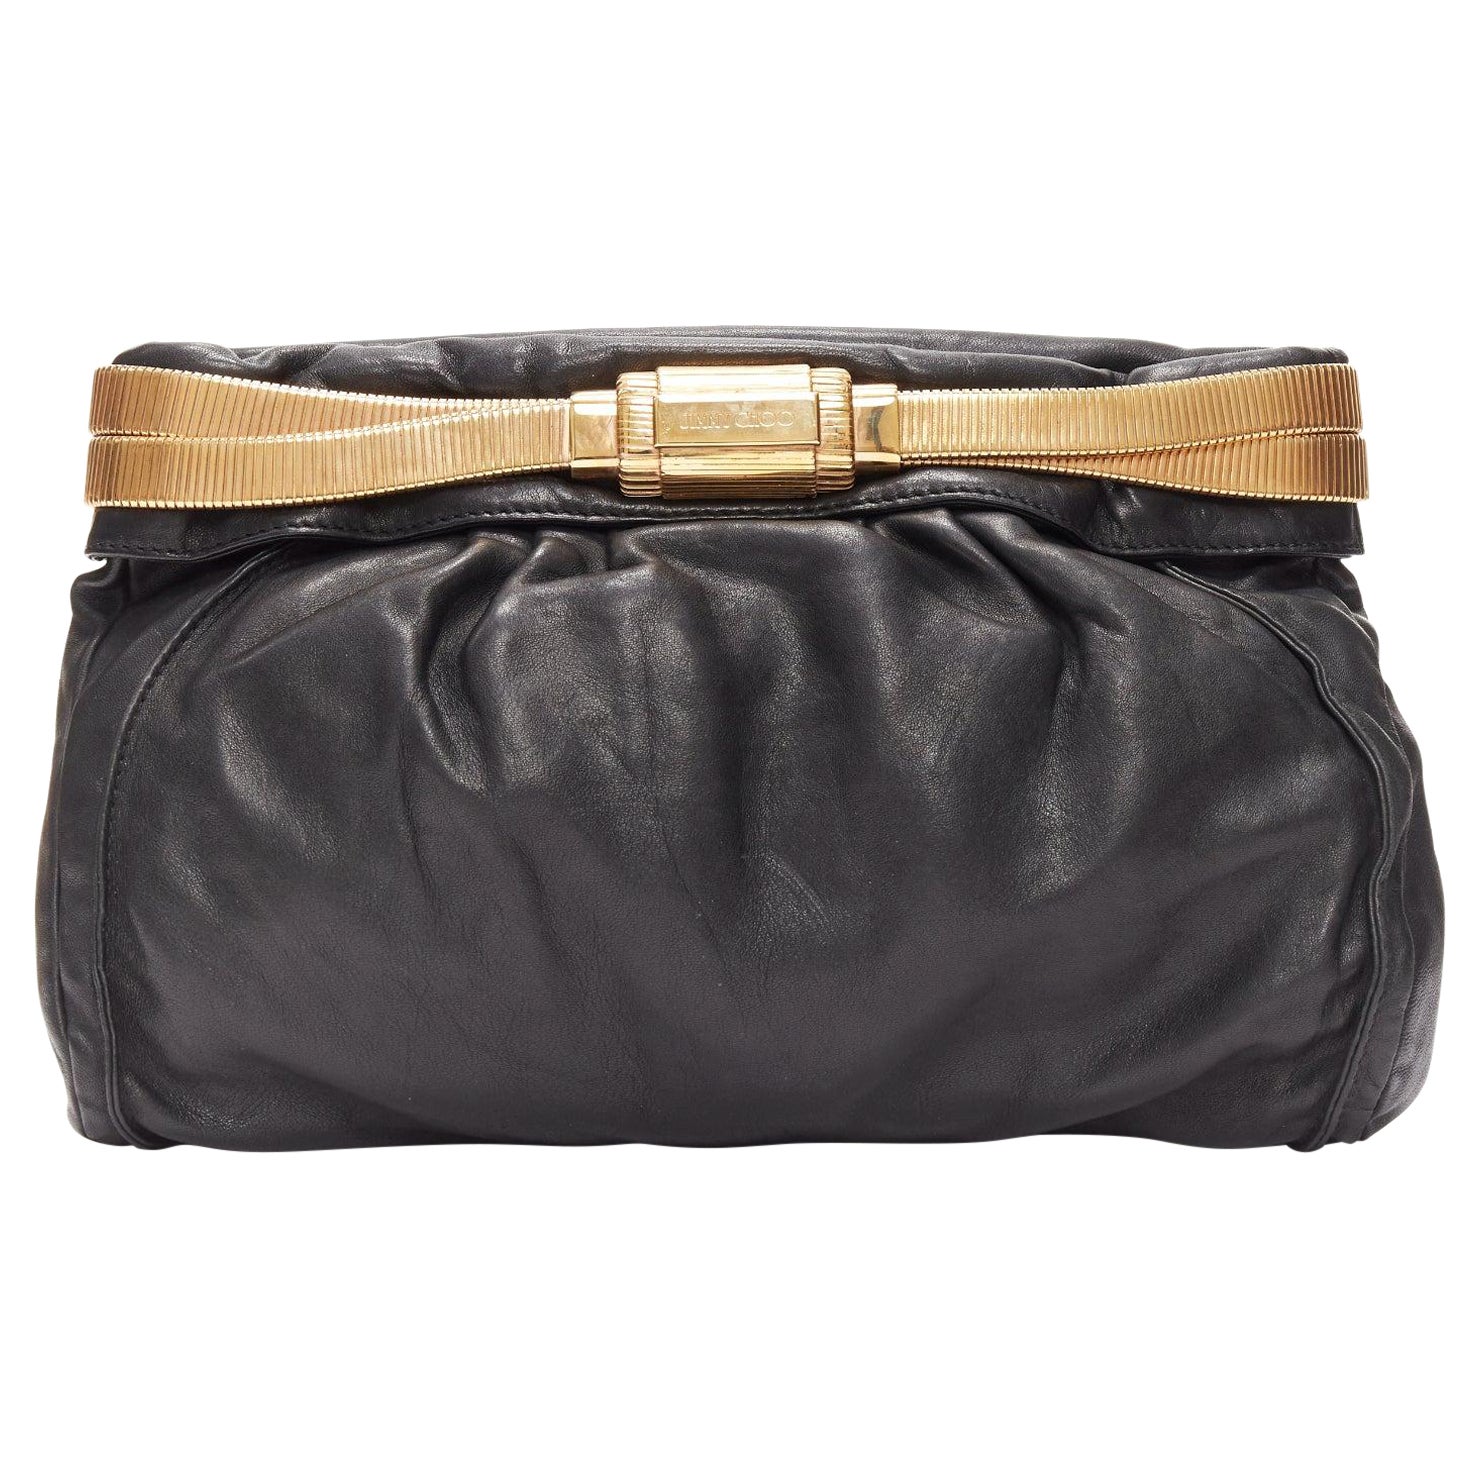 JIMMY CHOO black soft leather gold chain logo zip oversized clutch bag For Sale